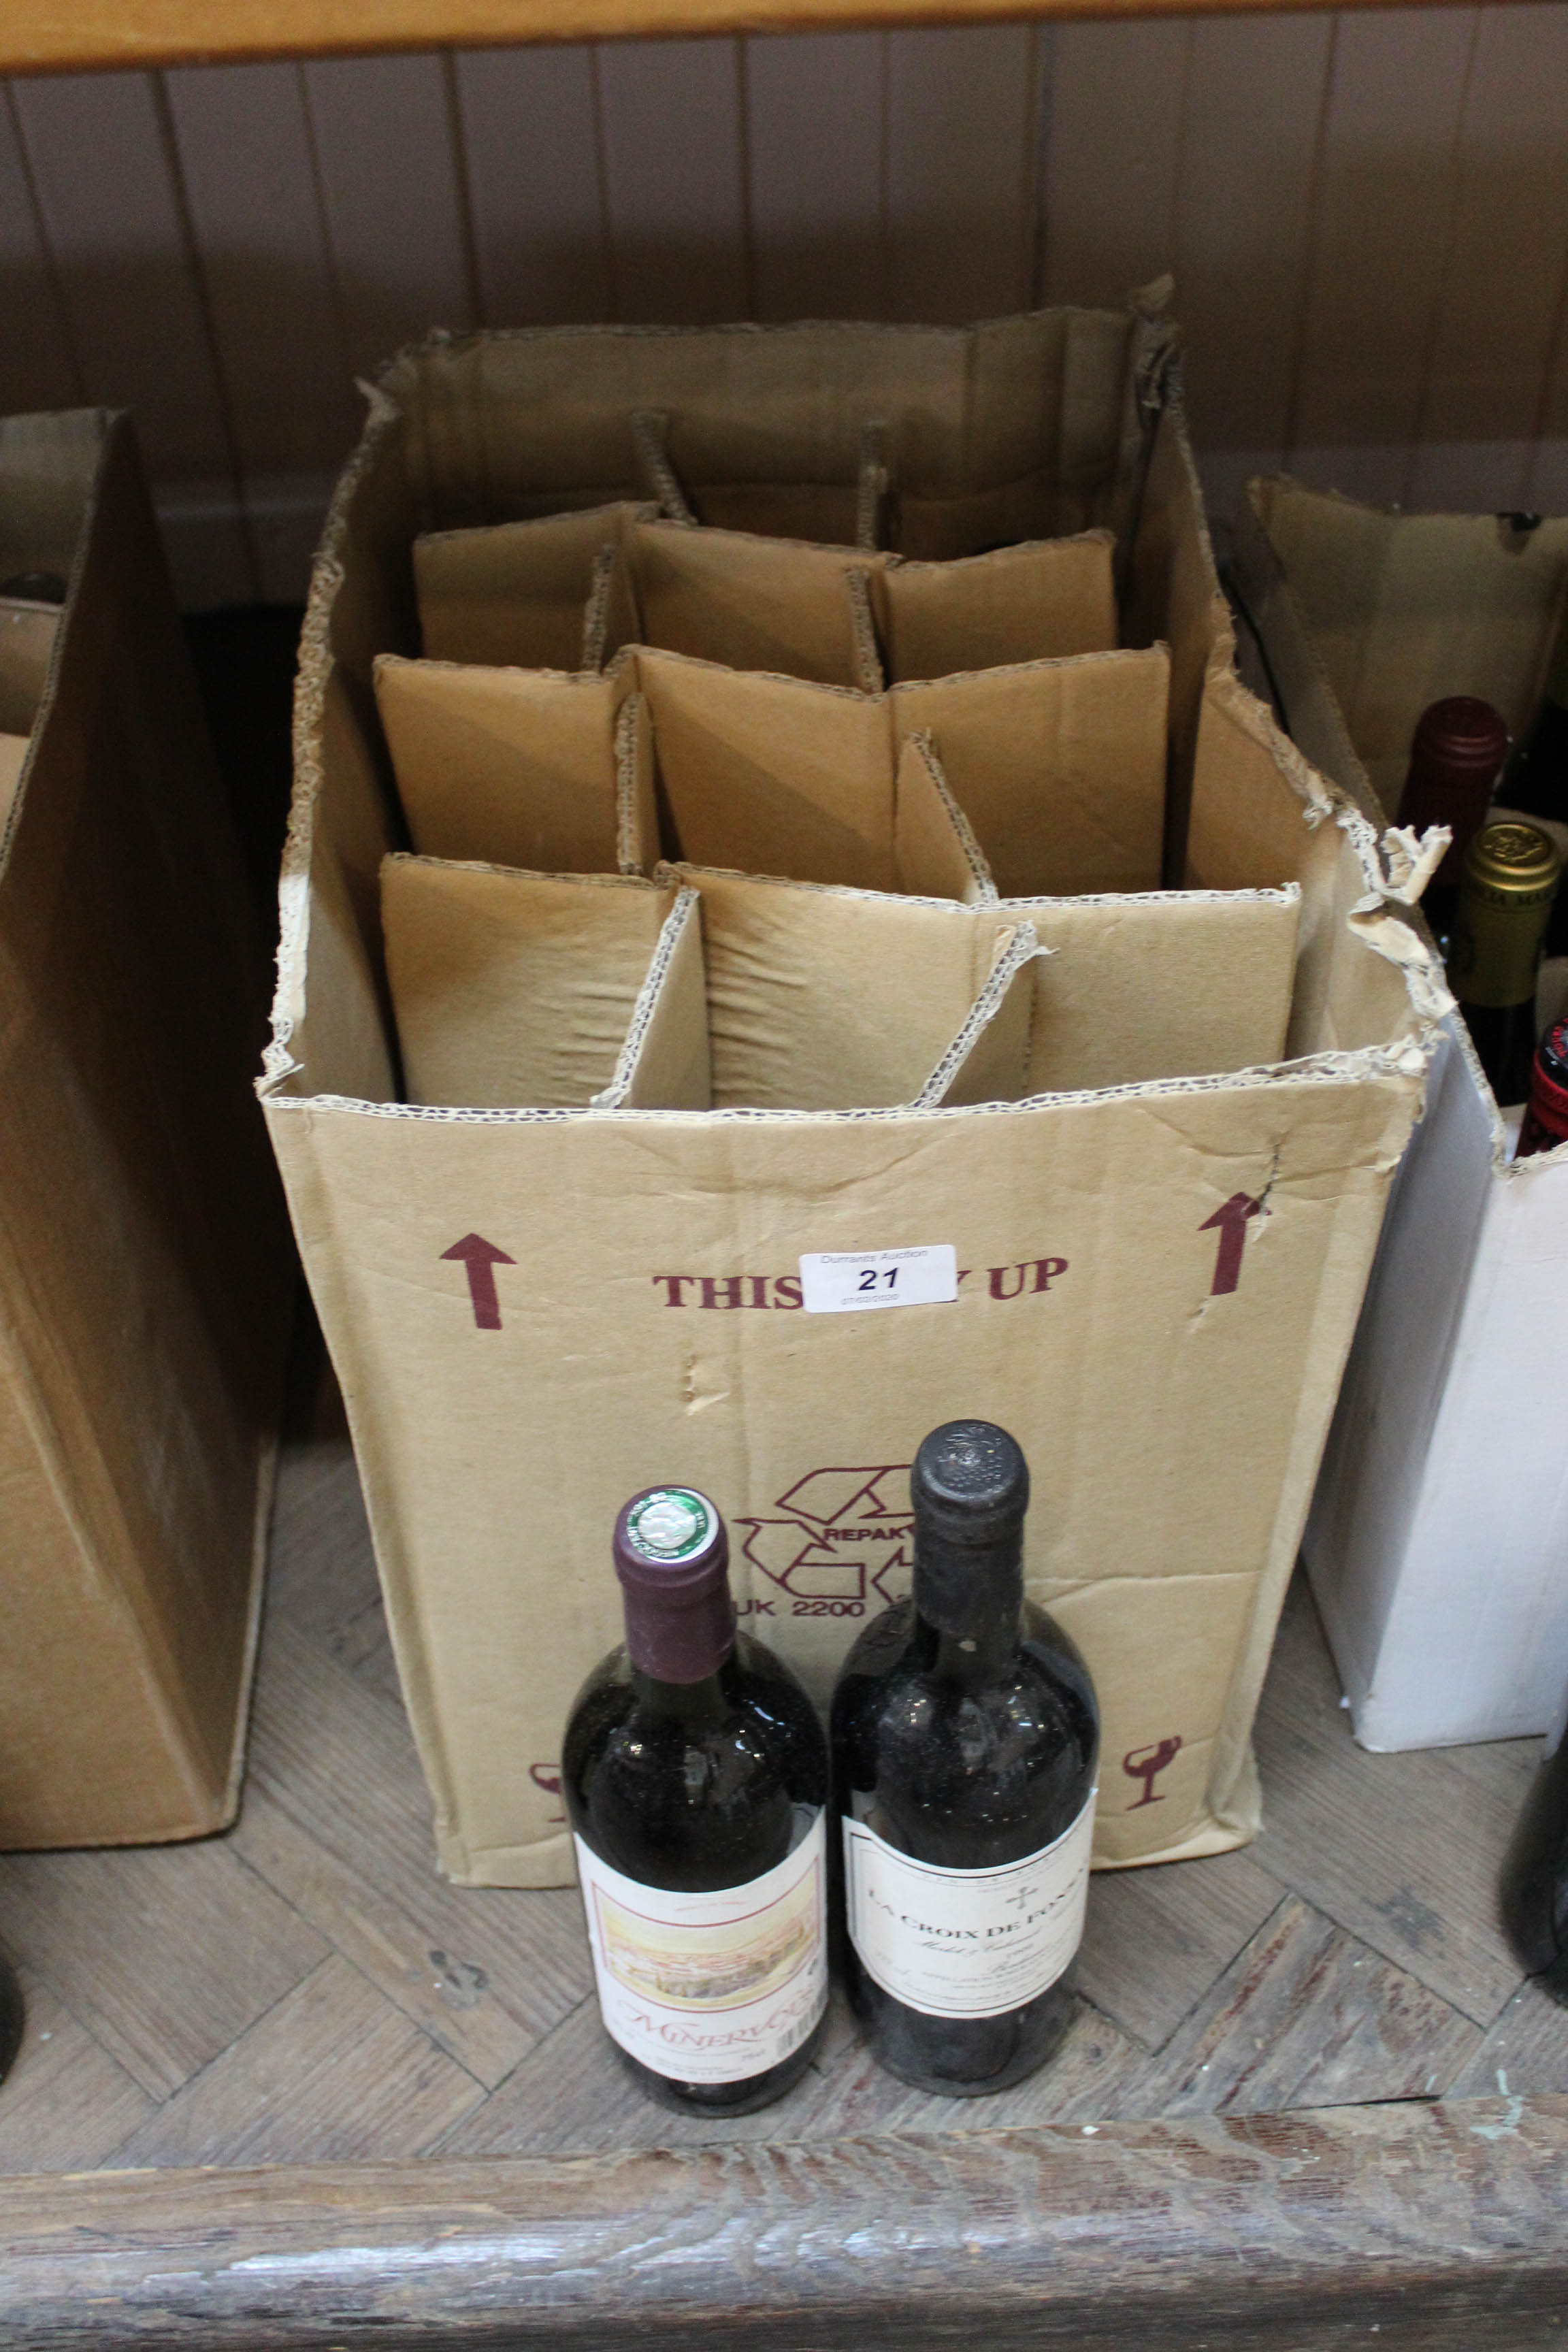 Twelve bottles of wine to include Merlot and Cabernet Sauvignon